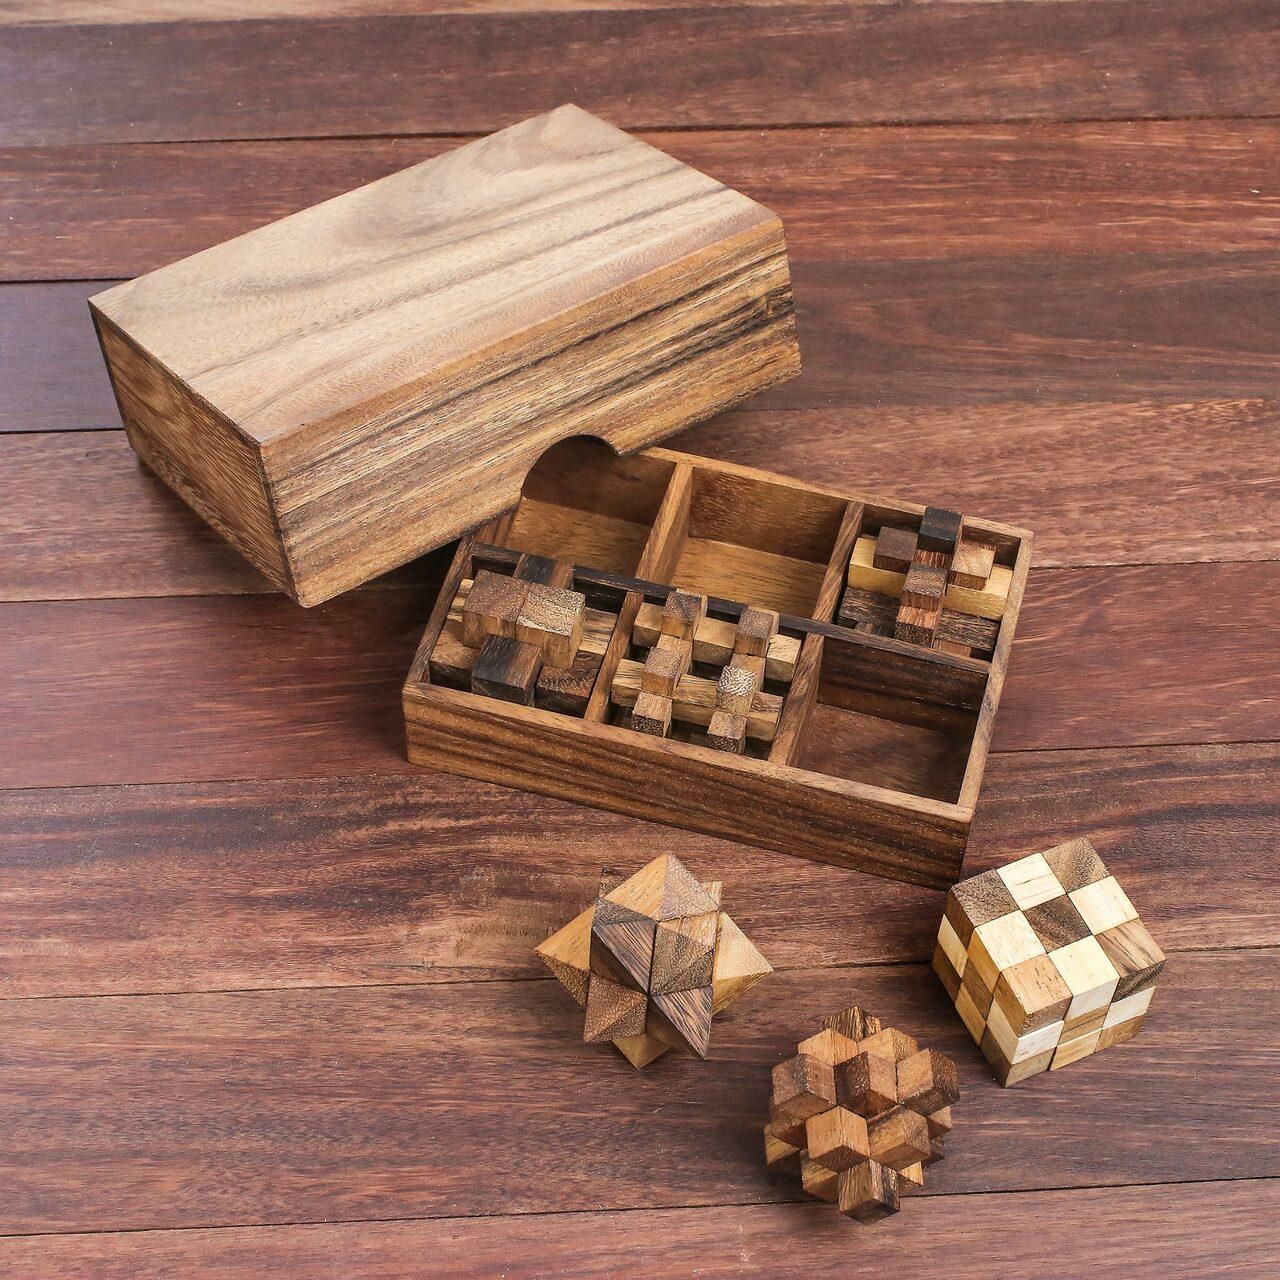 Strategy Tic-Tac-Toe Game With Brass Ornaments In A Wooden Box Gift For  Teacher